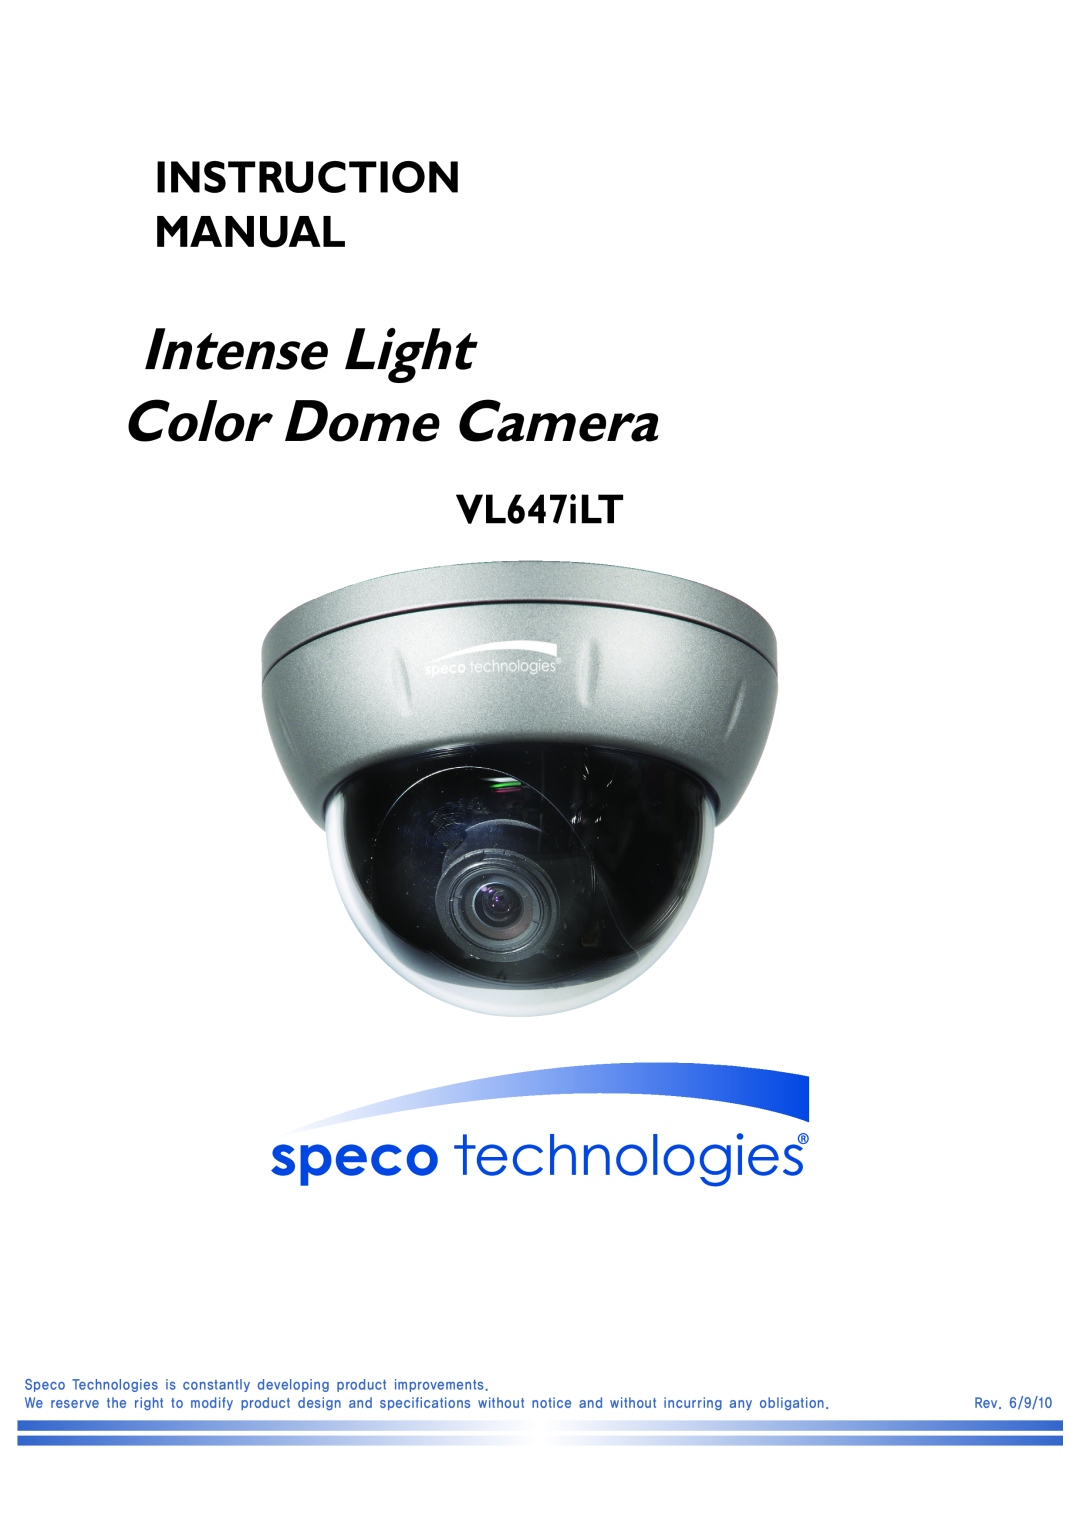 Speco Technologies VL647ILT warranty Intense Light, Color Dome Camera MP with Chameleon Cover, Features, Specifications 